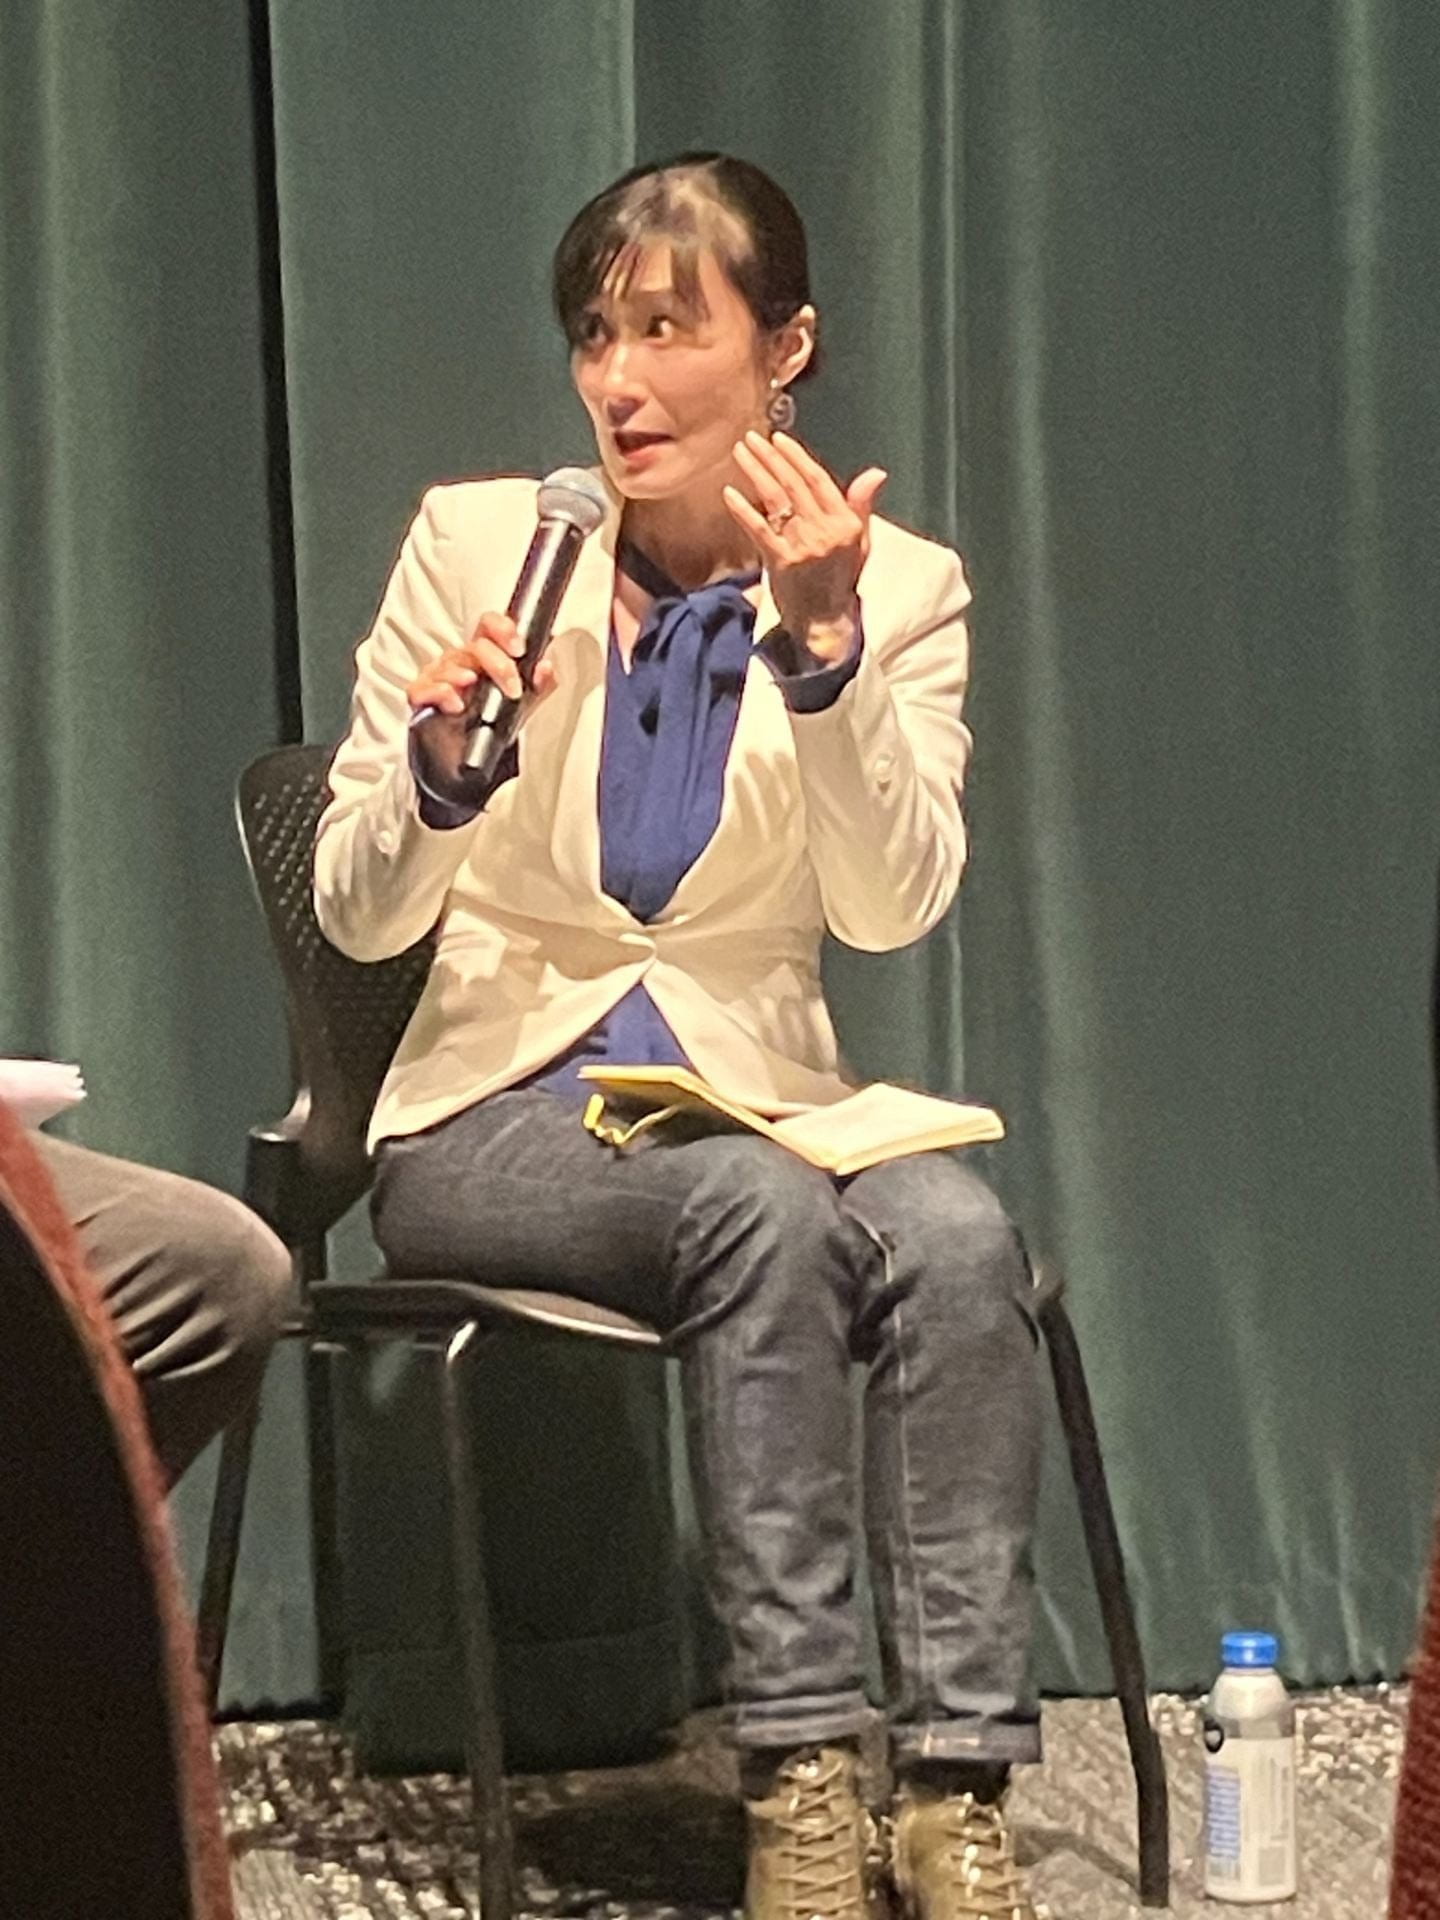 Professor Miyamoto talking during the panel. She wears a white blazer and blue blouse as she emphatically explains a concept to the audience.